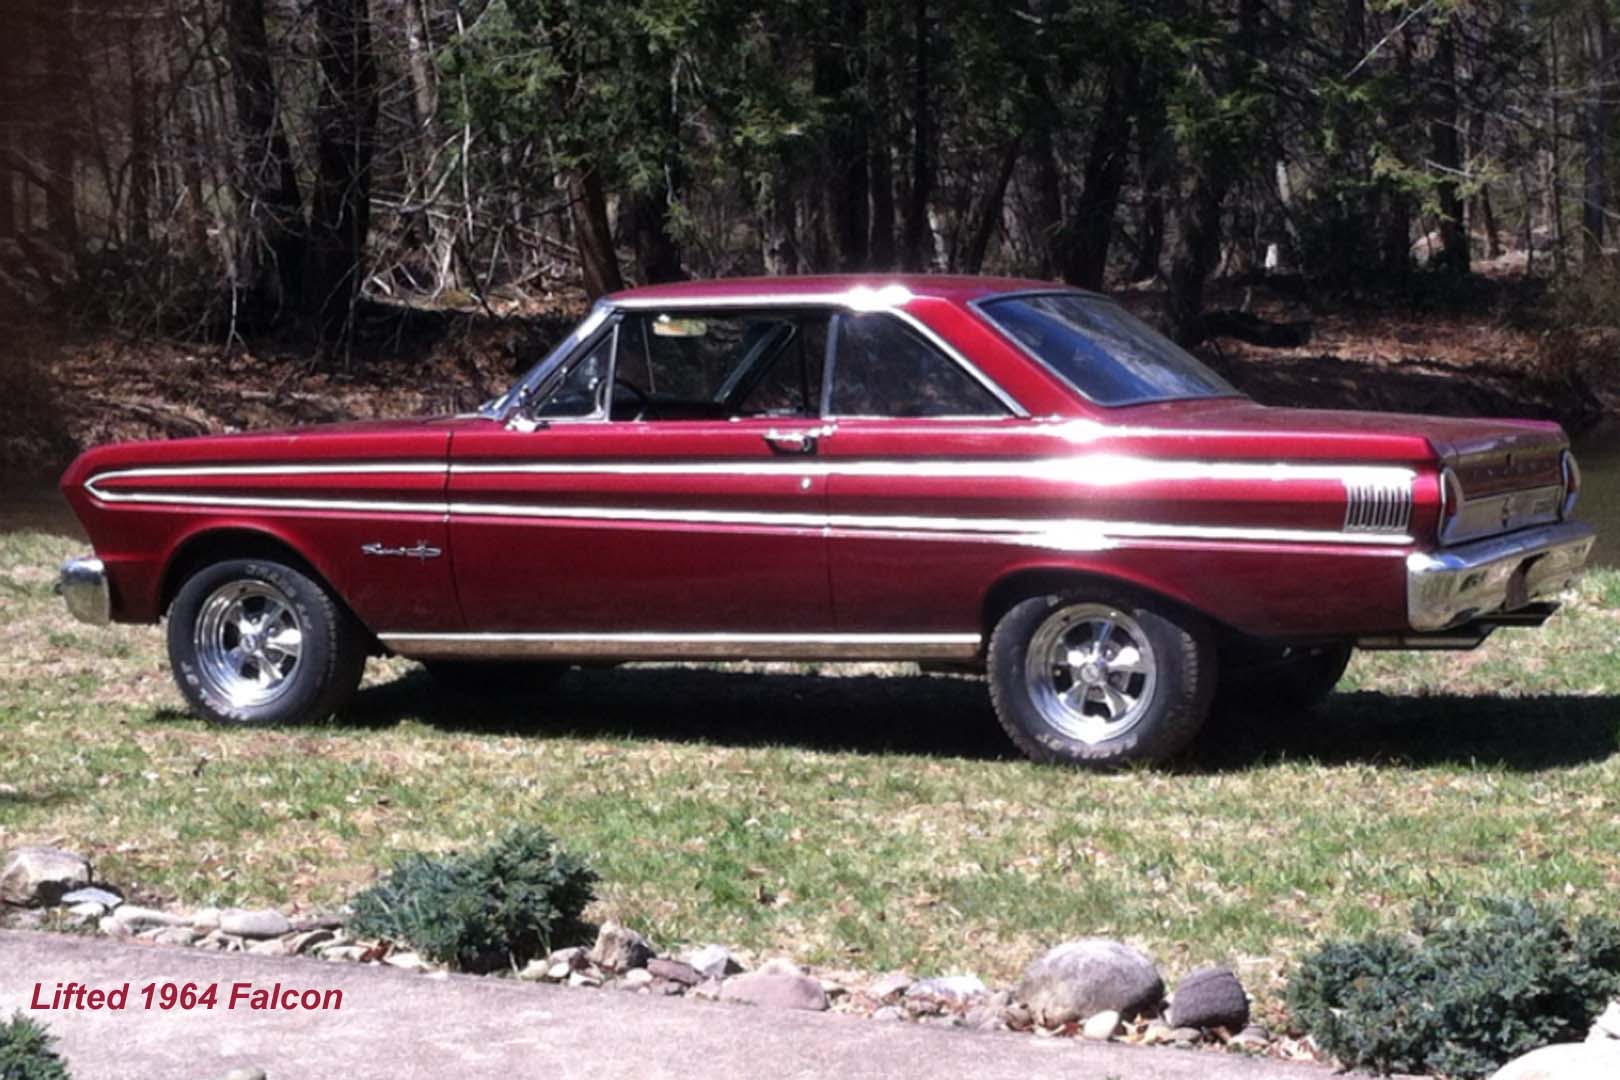 1964 Ford Falcon (lifted)